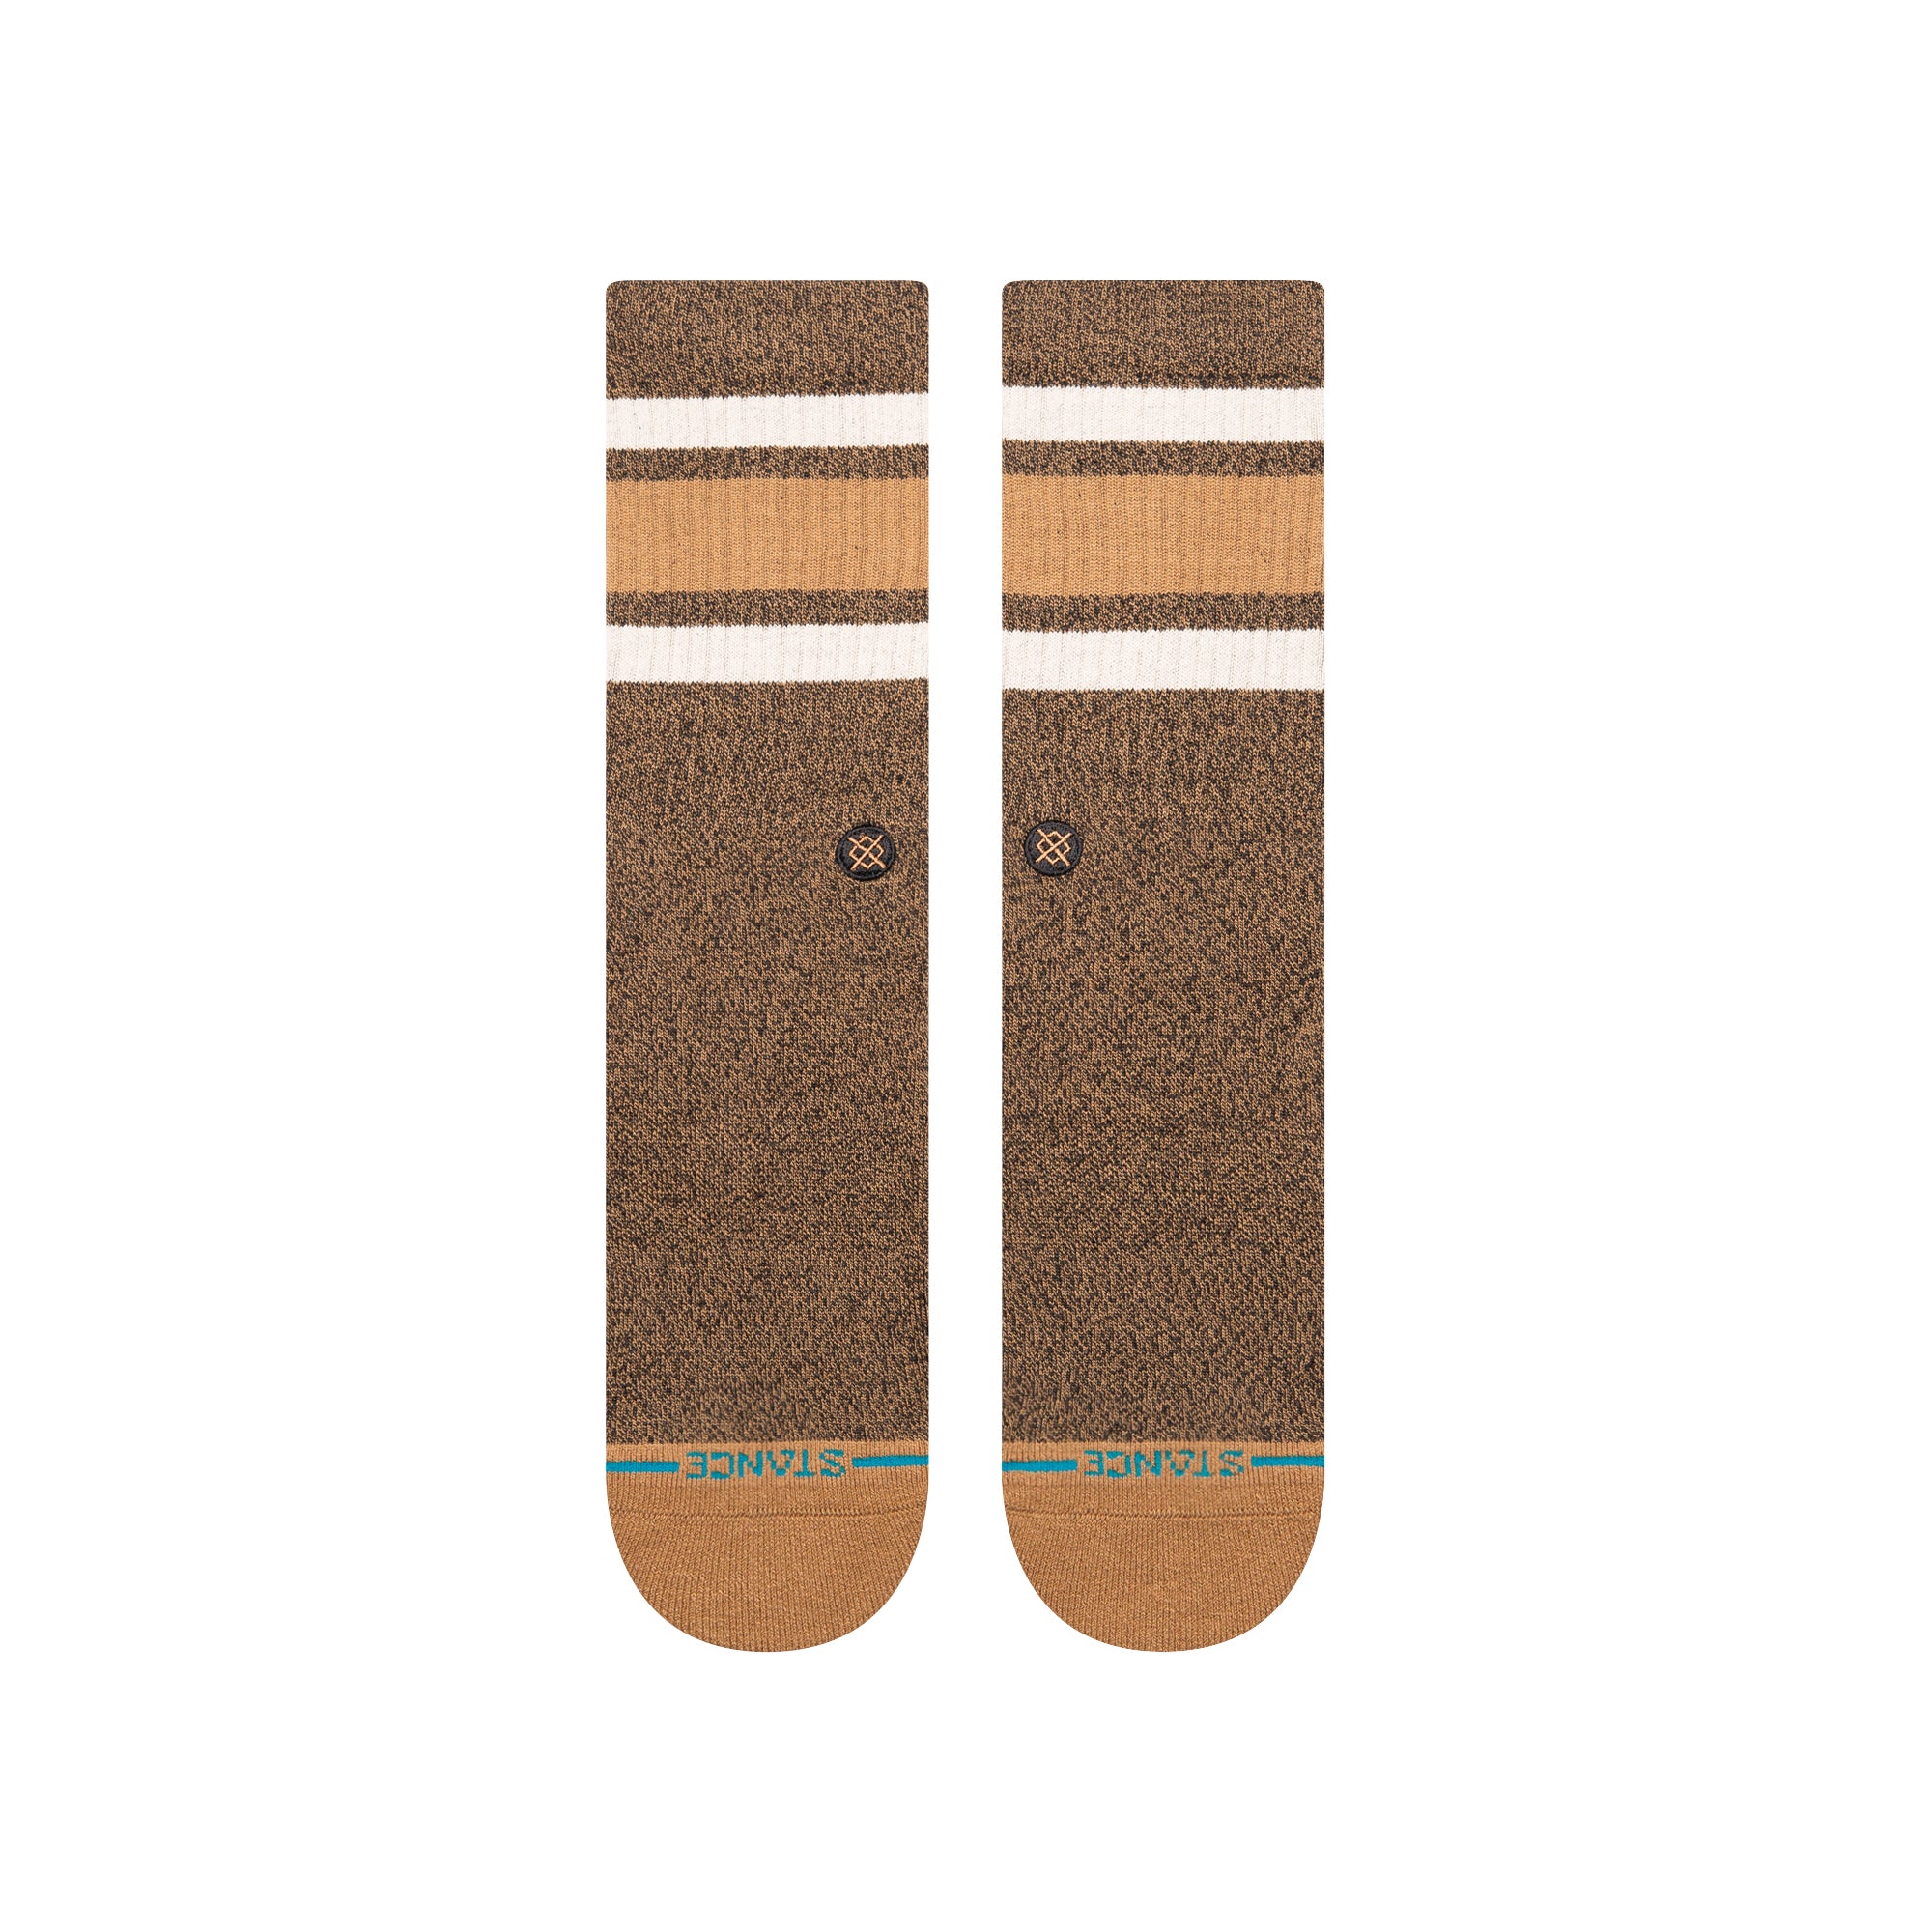 Stance Butter Blend Boyd Crew Socks  Anthropologie Japan - Women's  Clothing, Accessories & Home